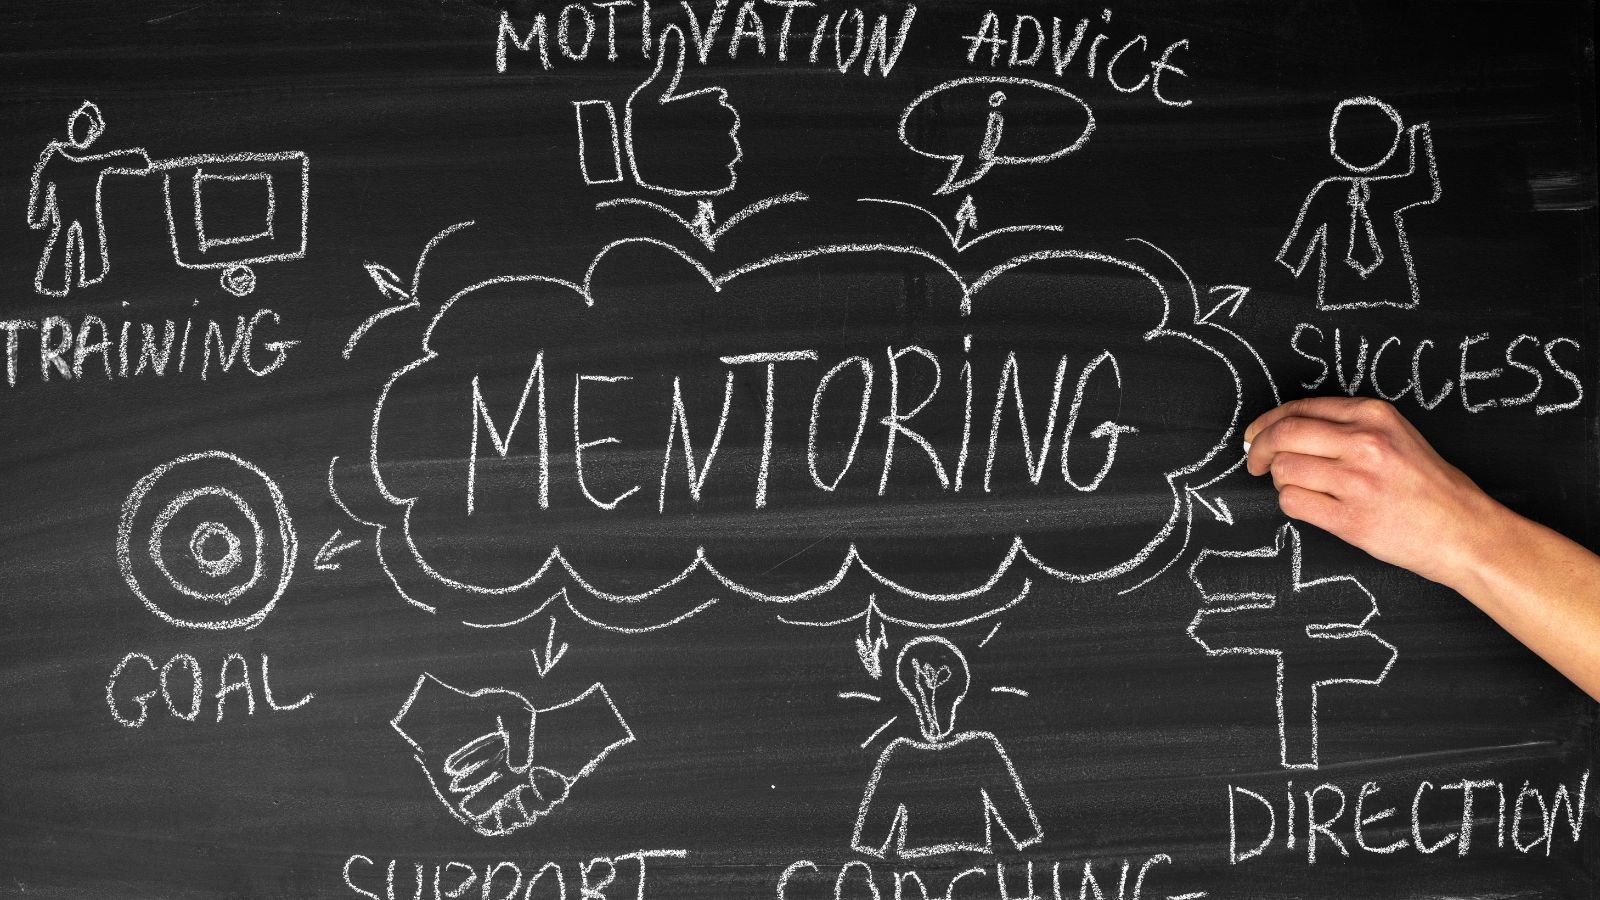 What is mentoring?